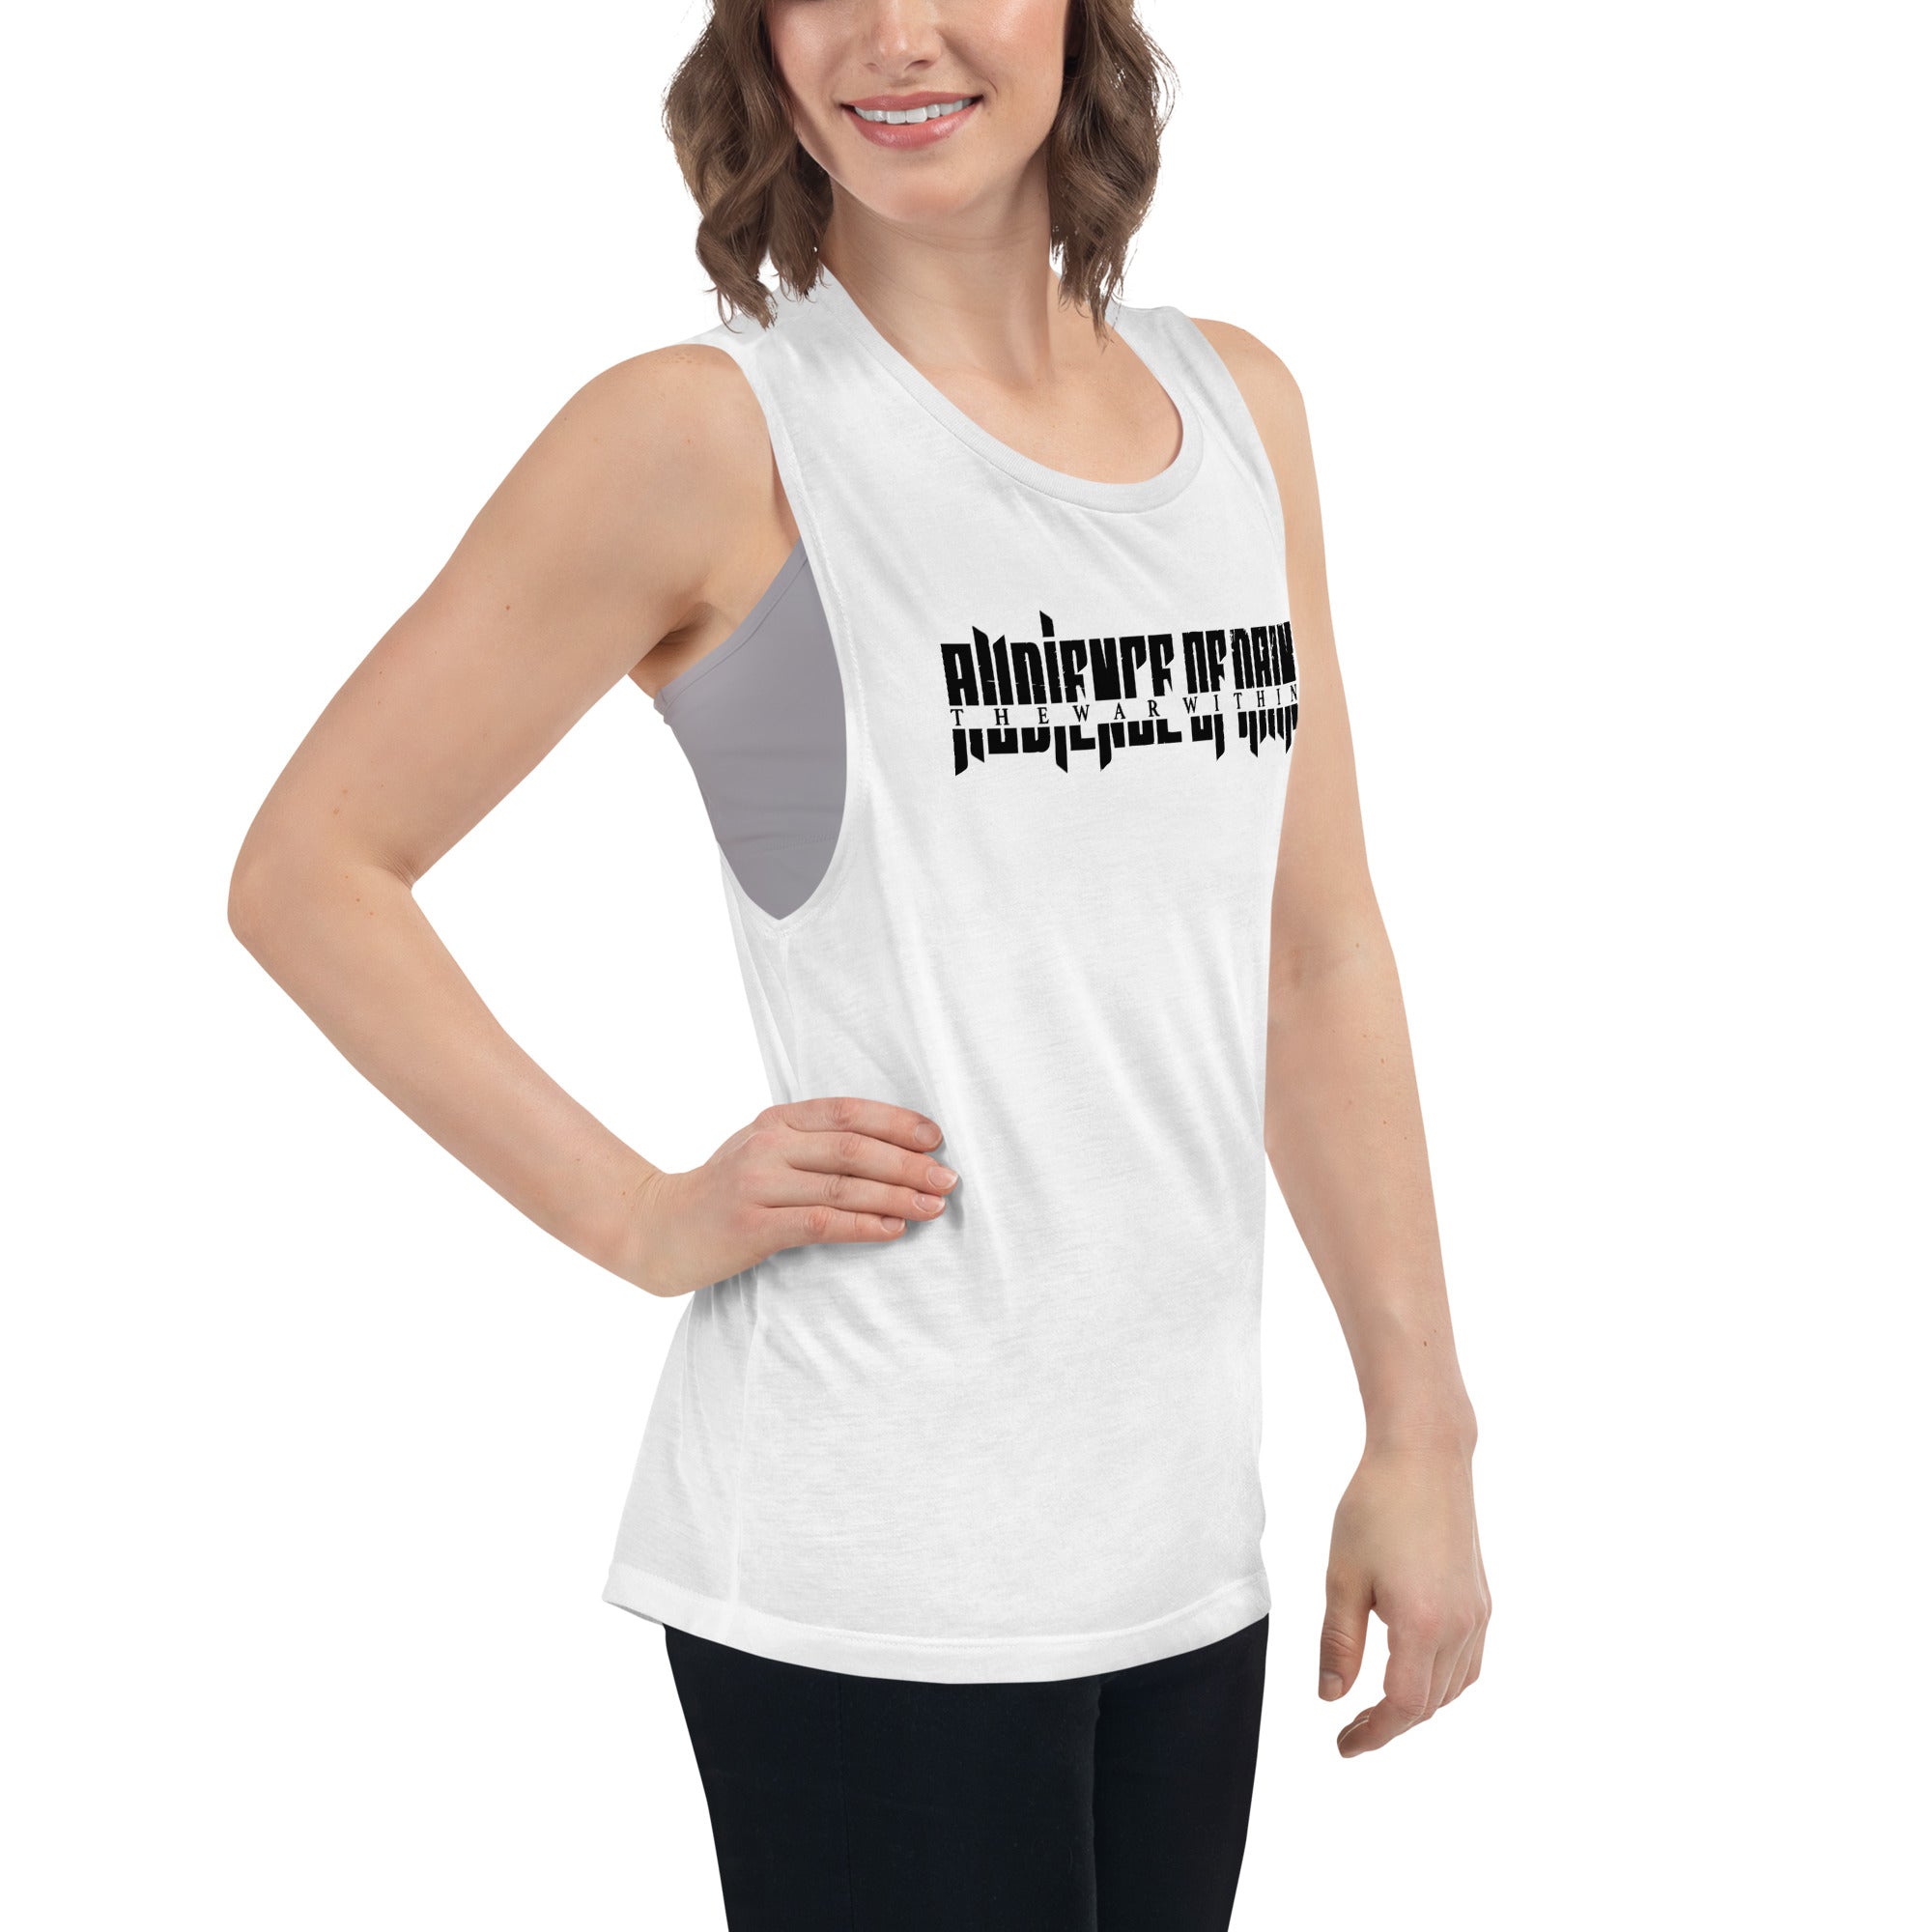 AUDIENCE OF RAIN - THE WAR WITHIN - LADIES MUSCLE TANK